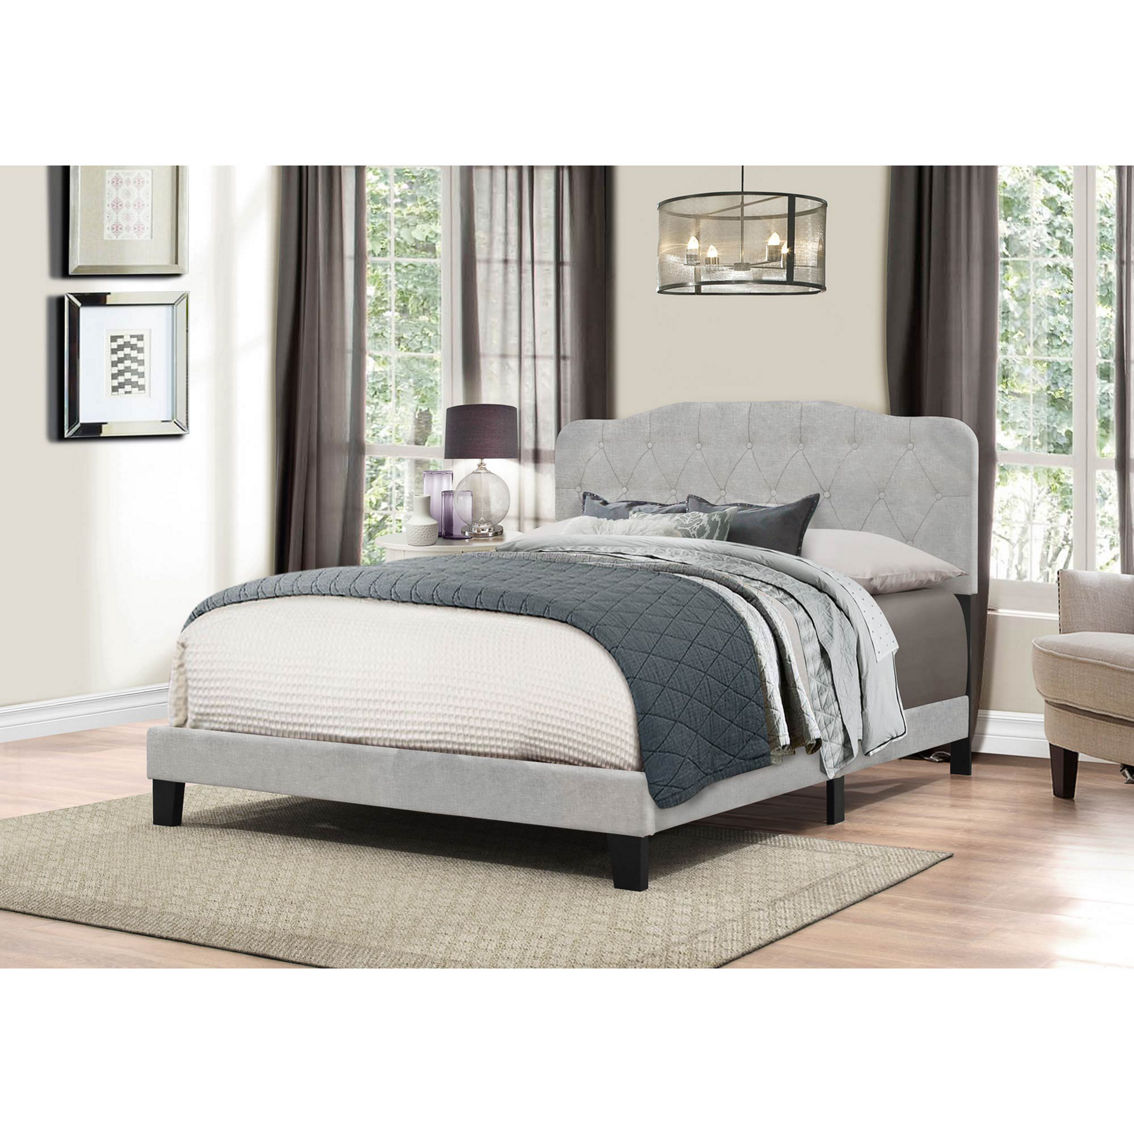 Hillsdale Nicole Bed in One - Image 2 of 3